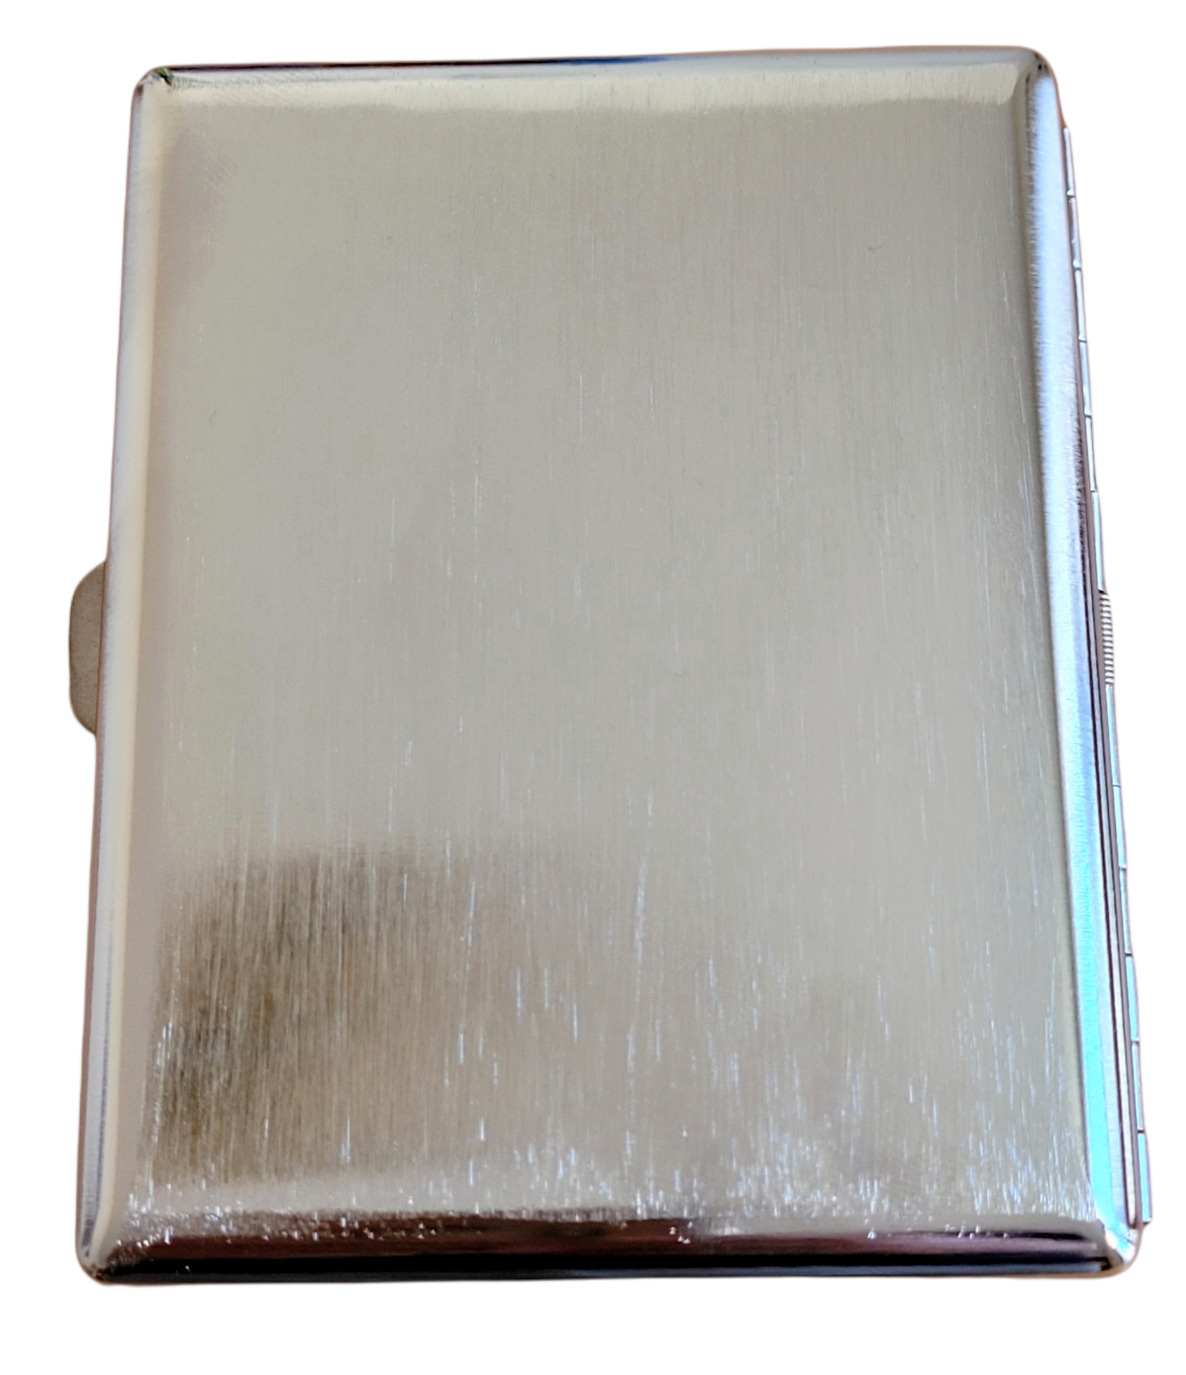 Metal Double Sided King & 100's Cigarette Case - Brushed Plain